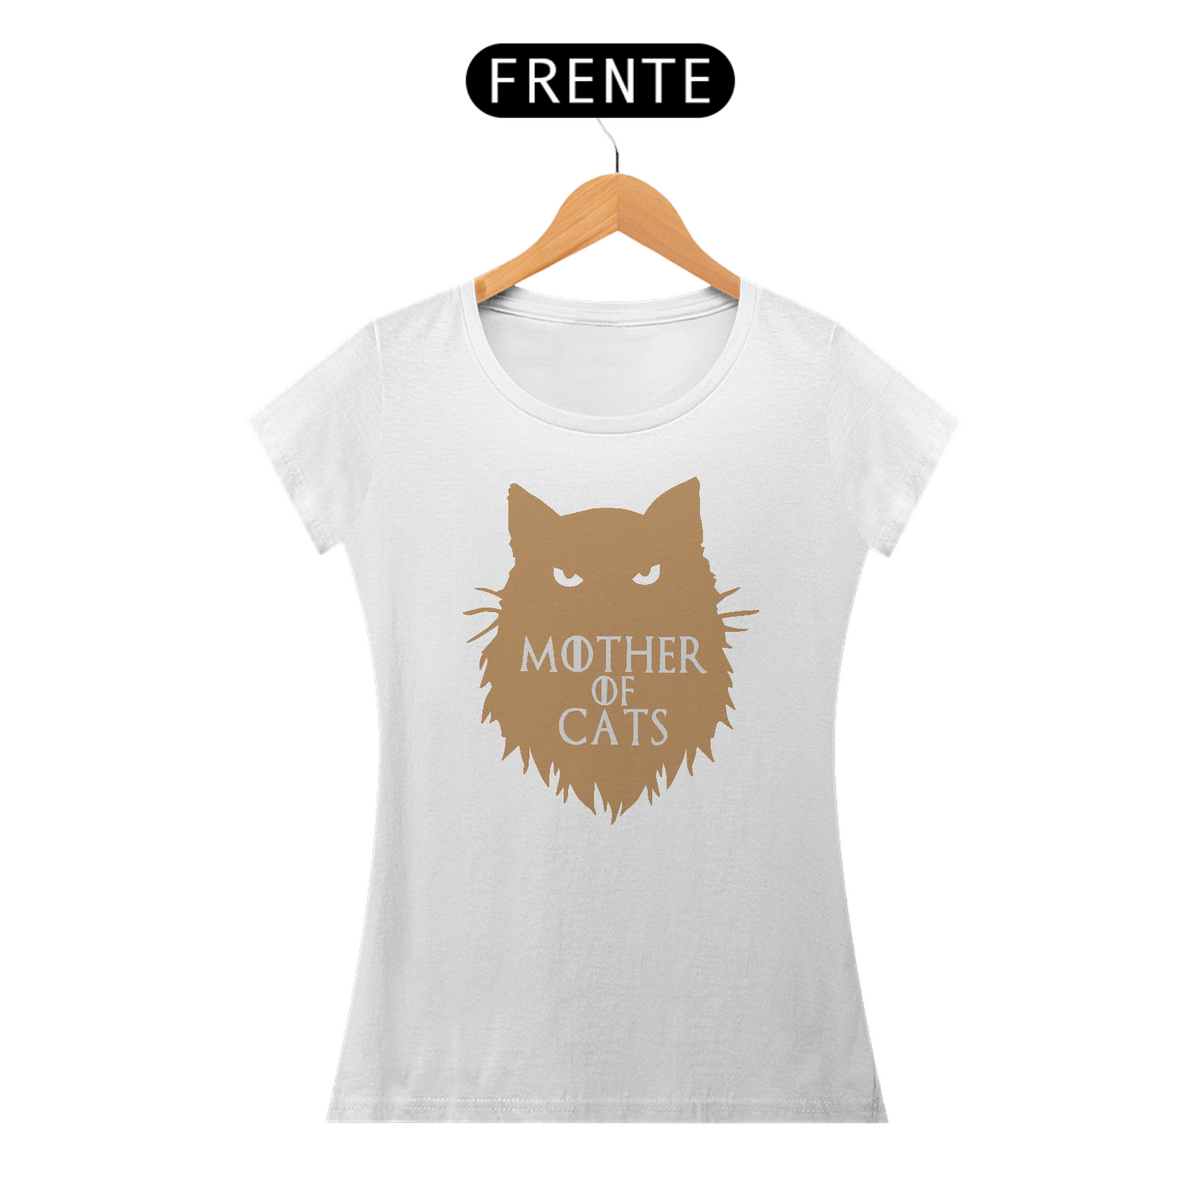 Nome do produto: Camisa Baby Long Prime Mother of Cats